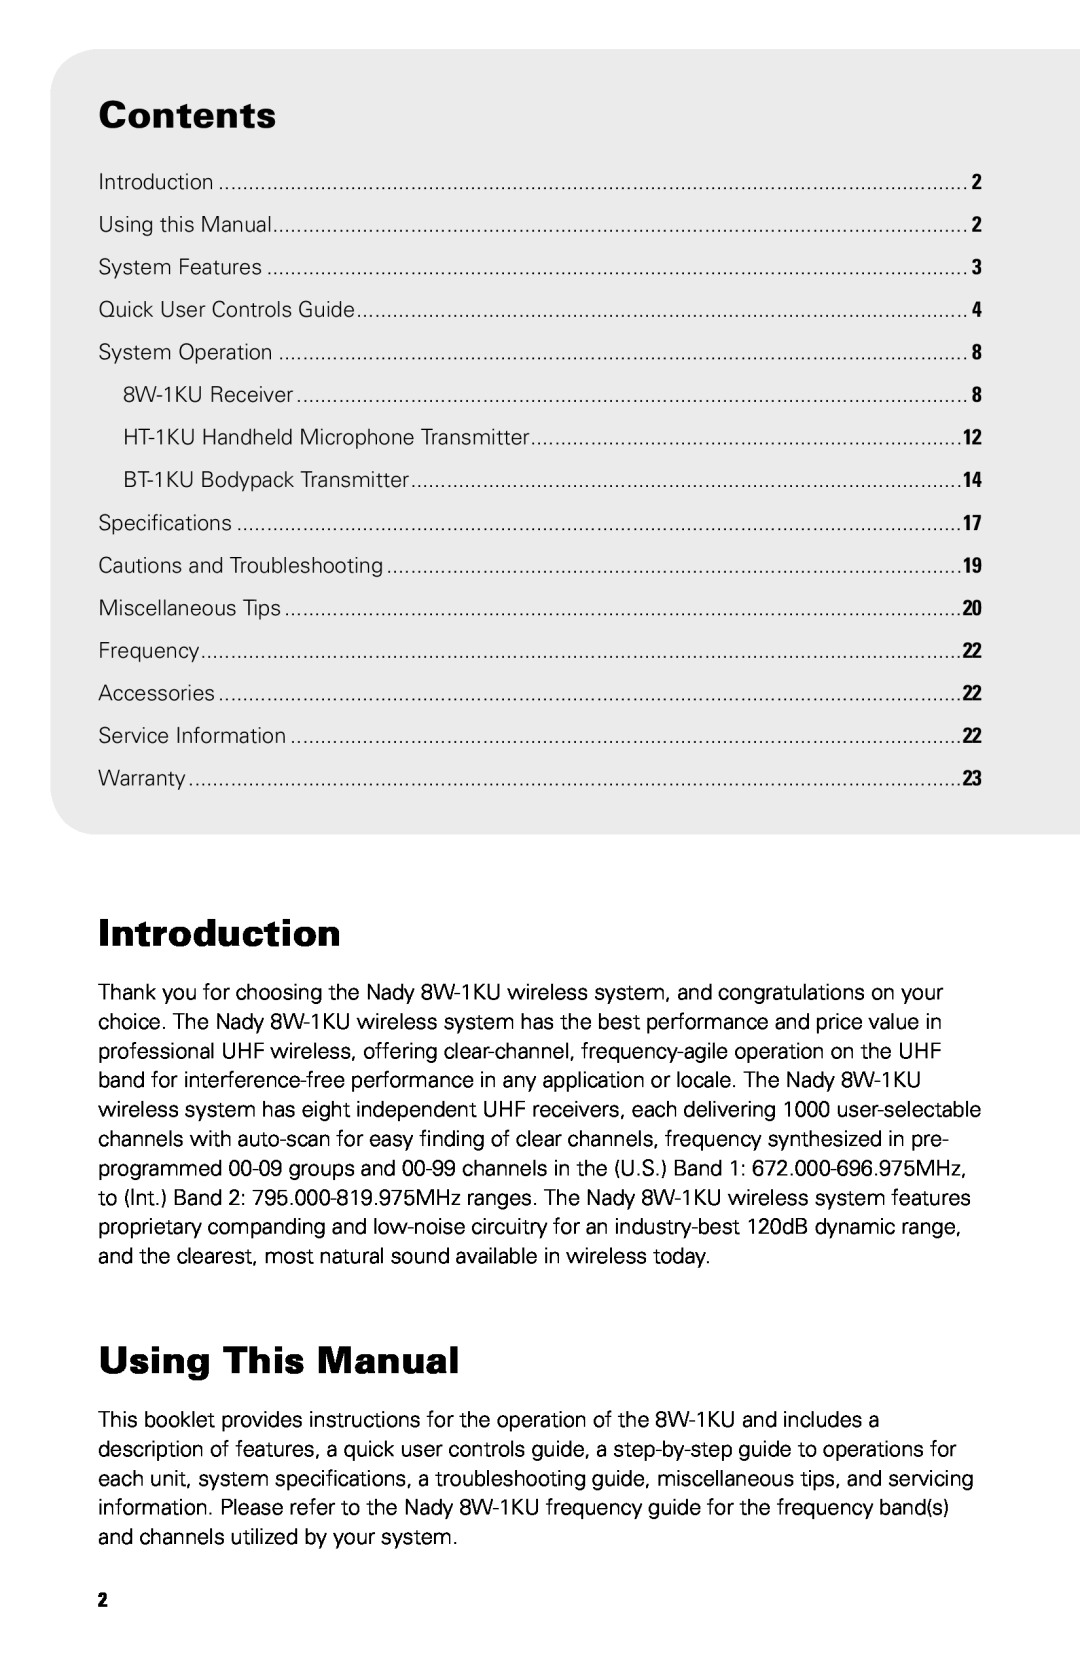 Nady Systems SW-1KU owner manual Contents, Introduction, Using This Manual, Using this Manual, Quick User Controls Guide 